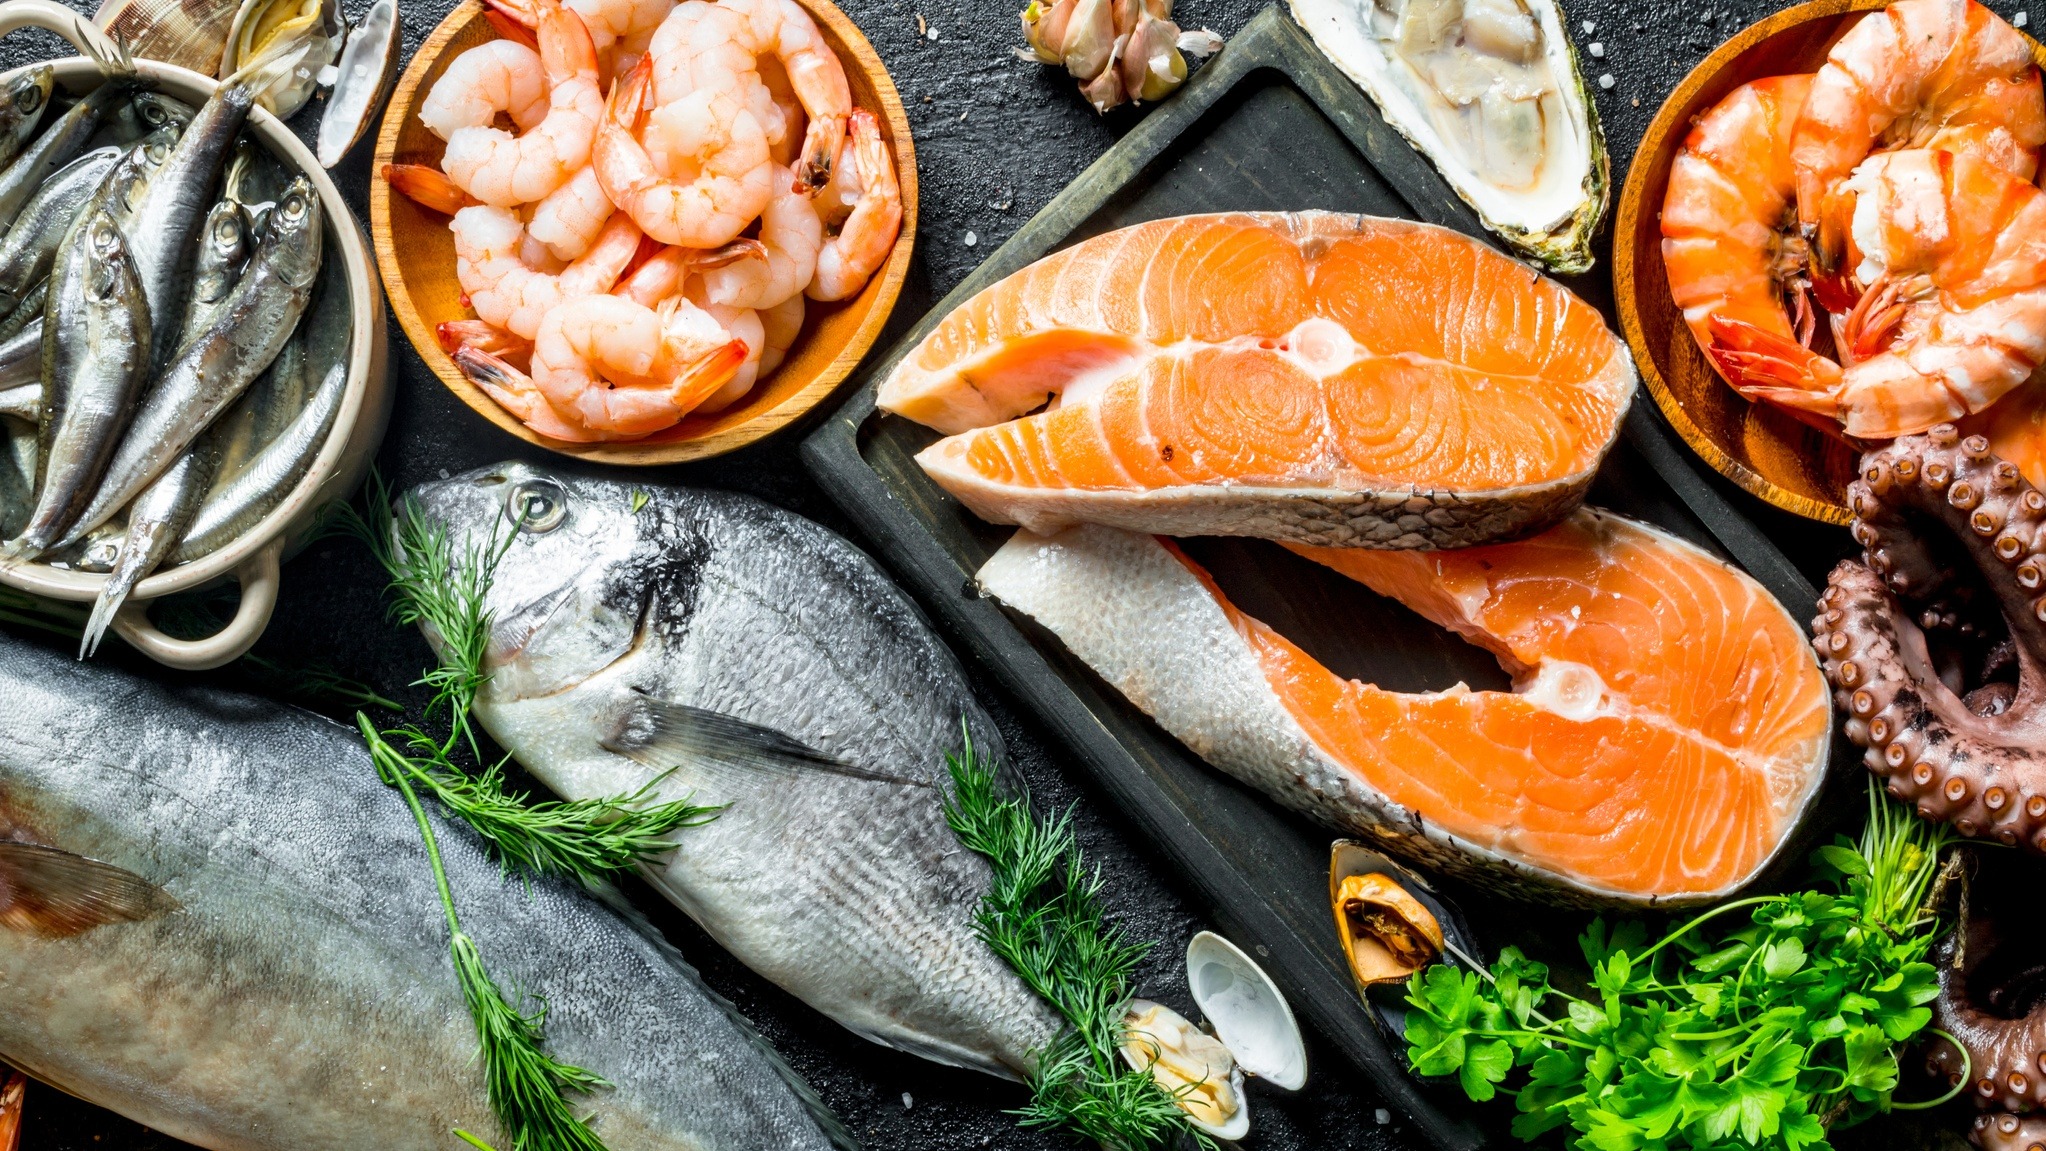 What Are Some Health Benefits Associated With Consuming Seafood Twice A Week?